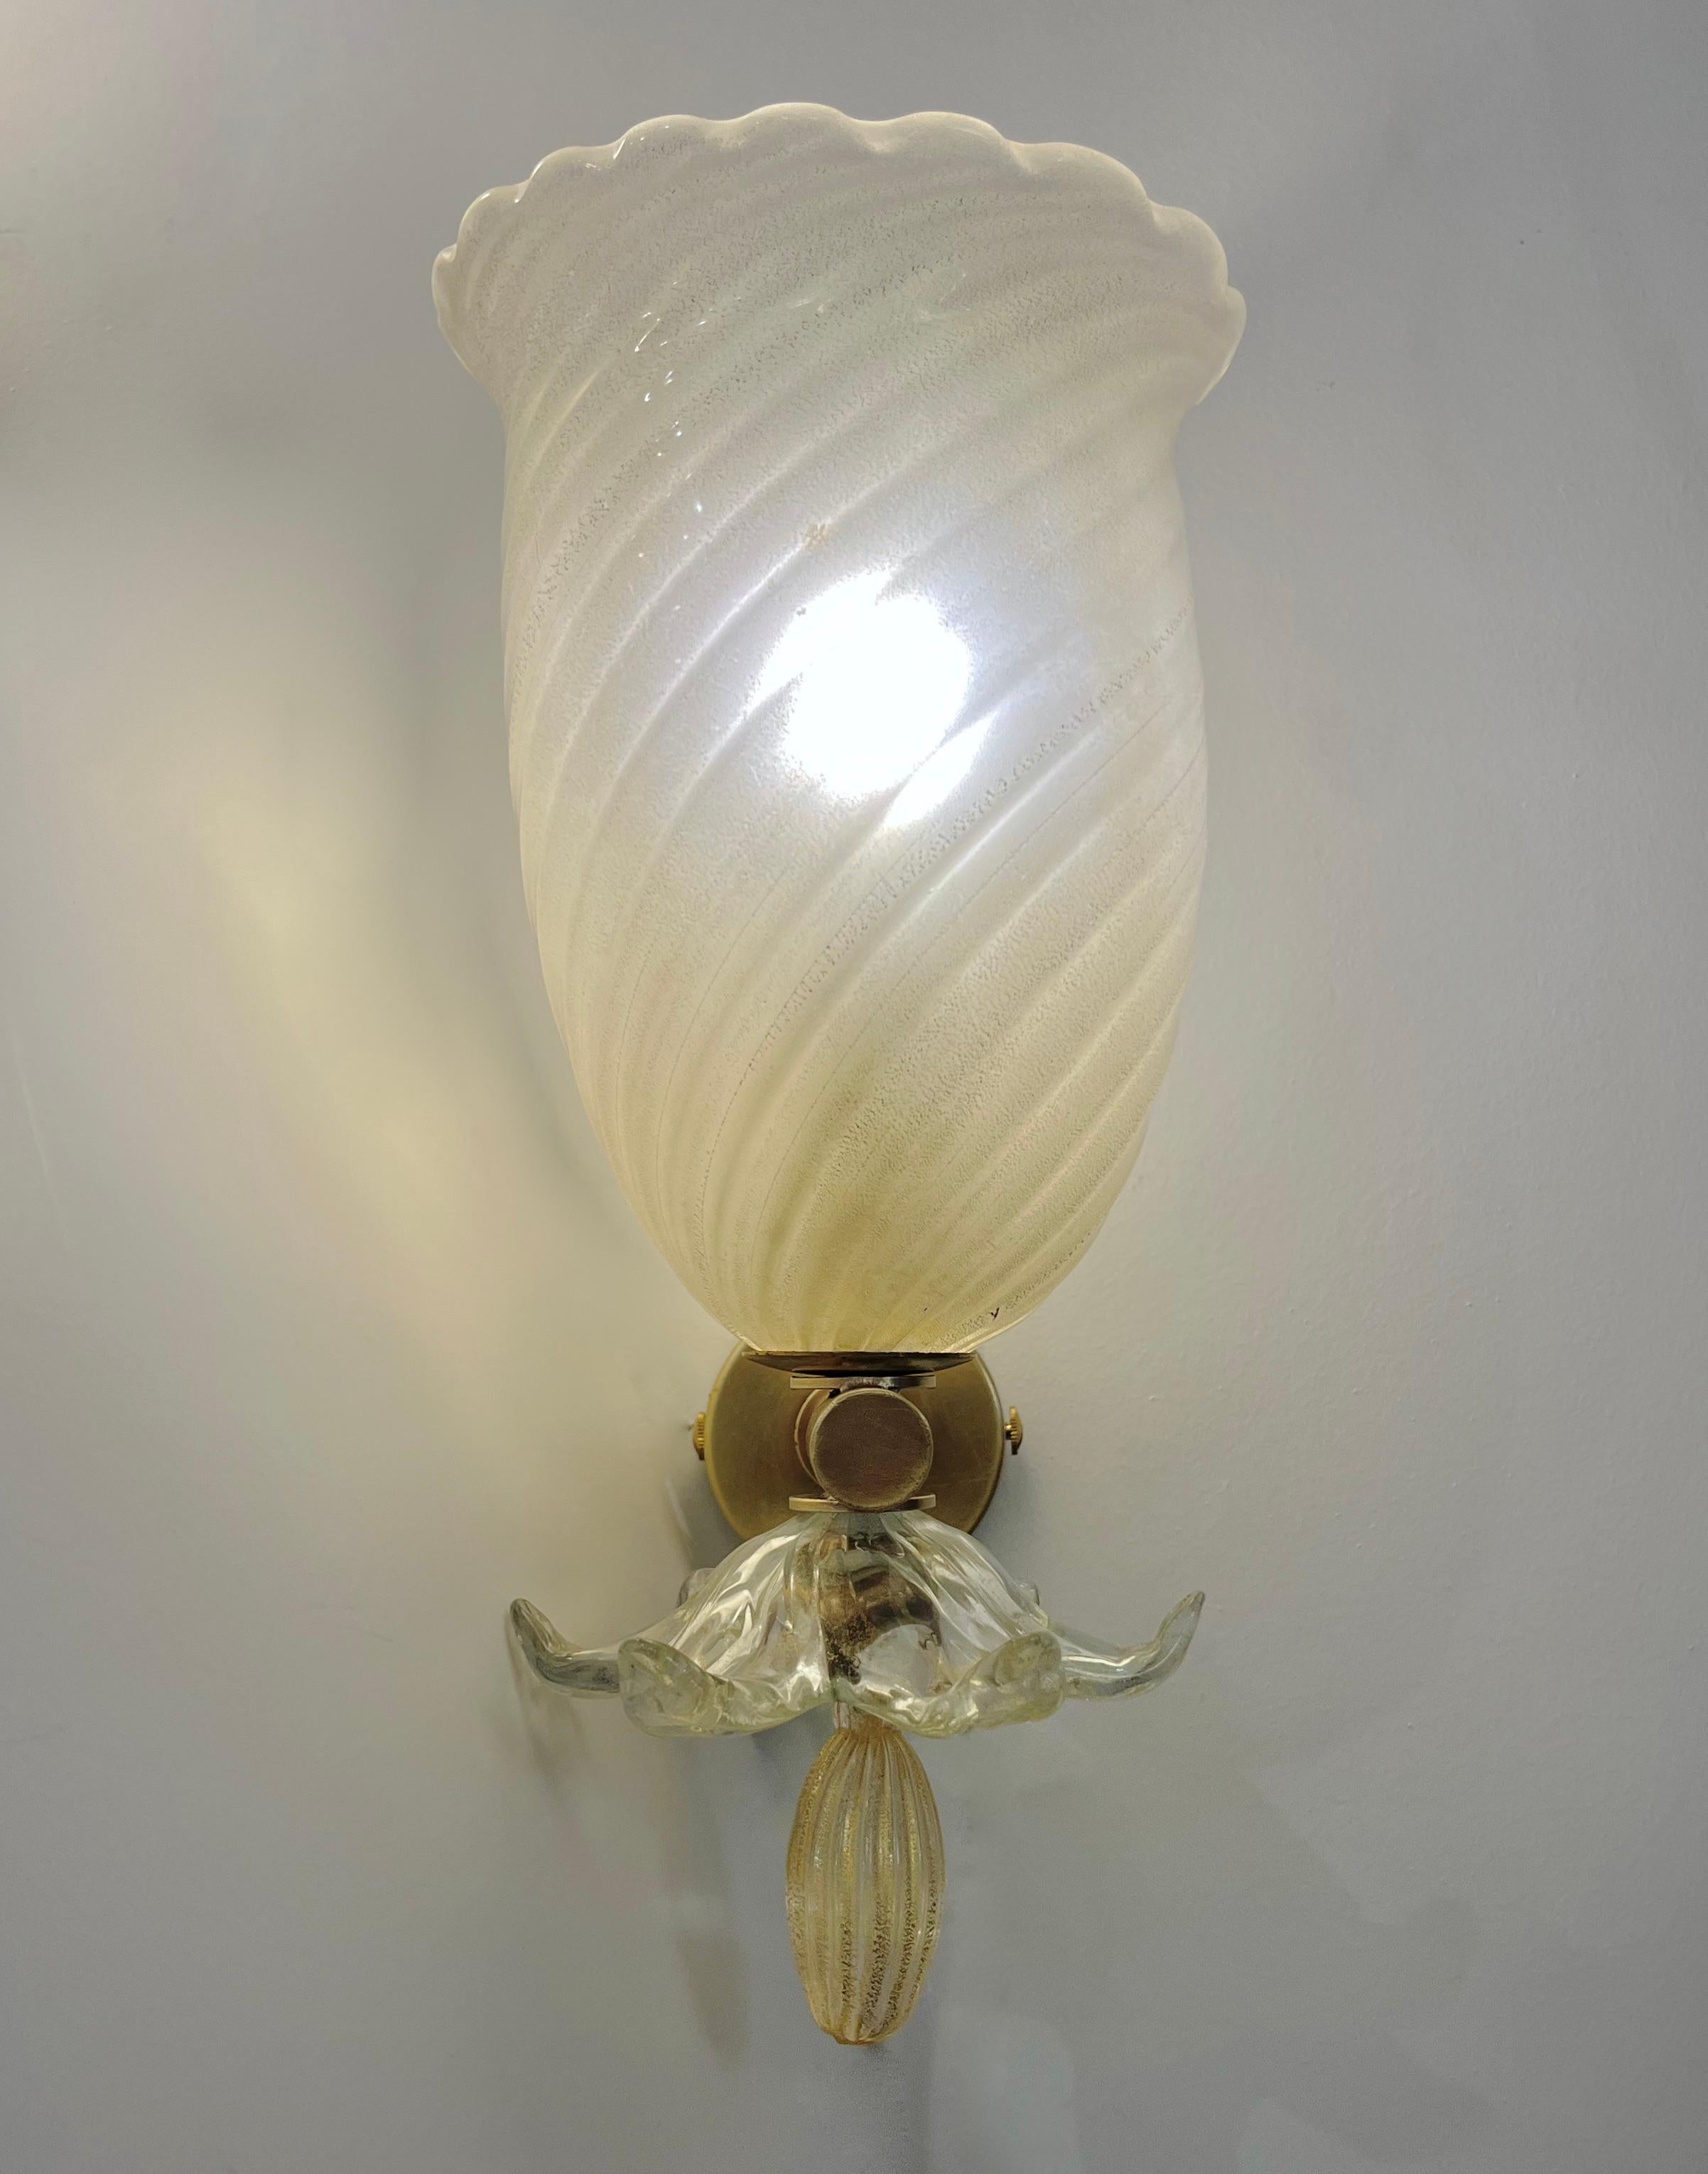 Venetian pair of wall lights of traditional organic design, in Art Deco style, entirely handcrafted in Murano (Italy), the scalloped edge bowls in high-quality frosted crystal blown Murano glass worked with pure 24-karat gold inclusions, typical of